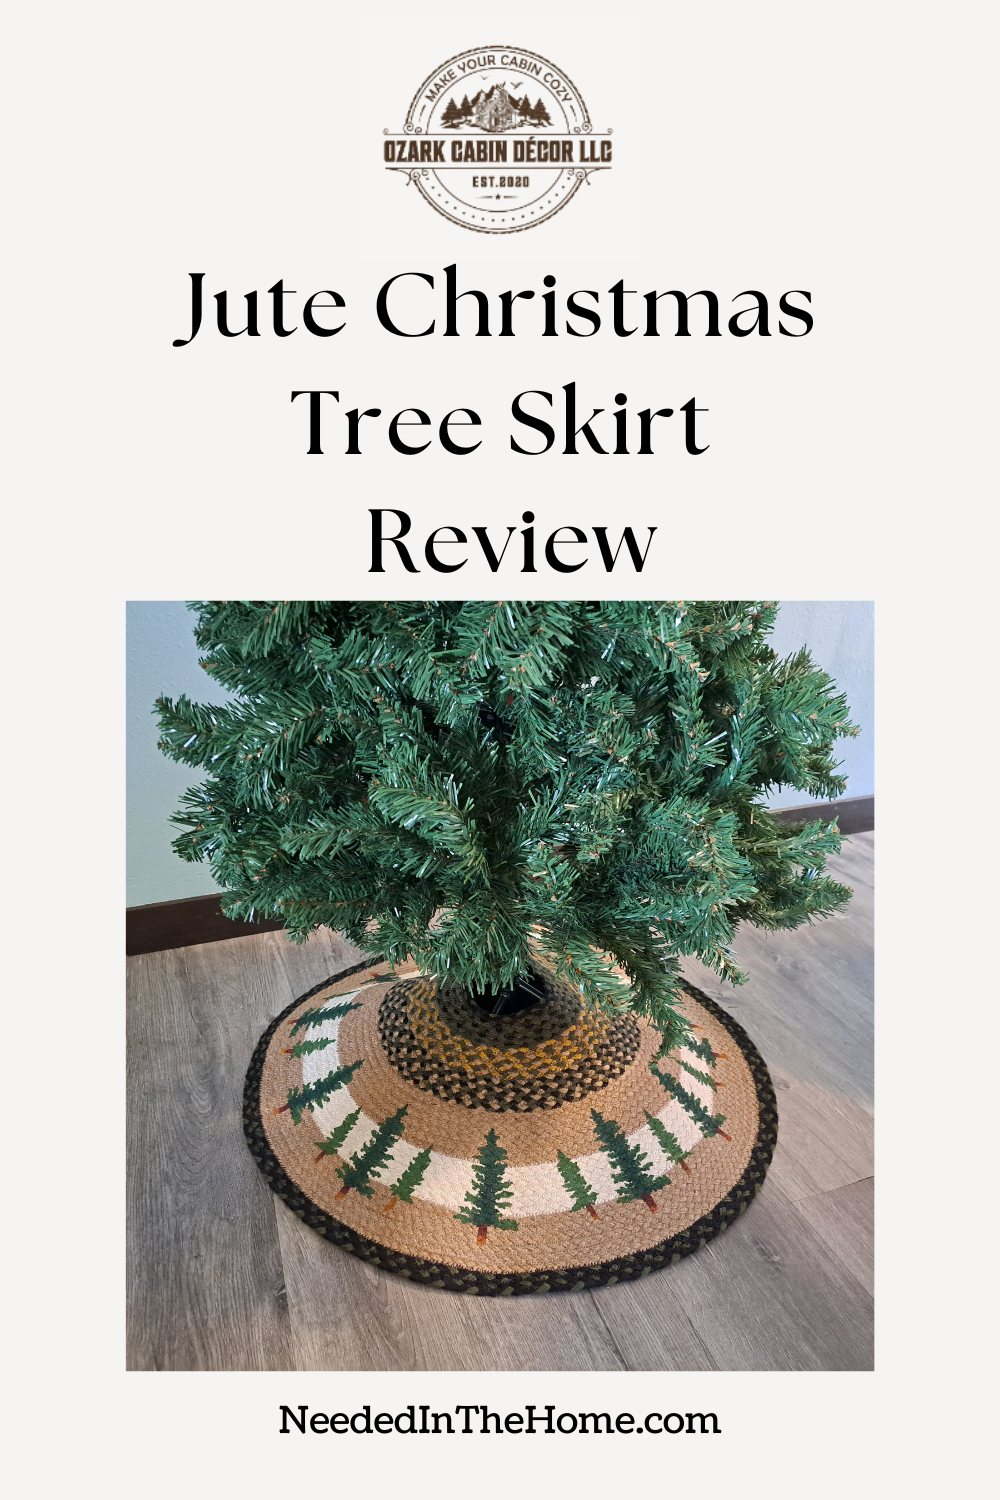 product logo jute christmas tree skirt review handpainted trees on a jute skirt under a christmas tree on a wood floor